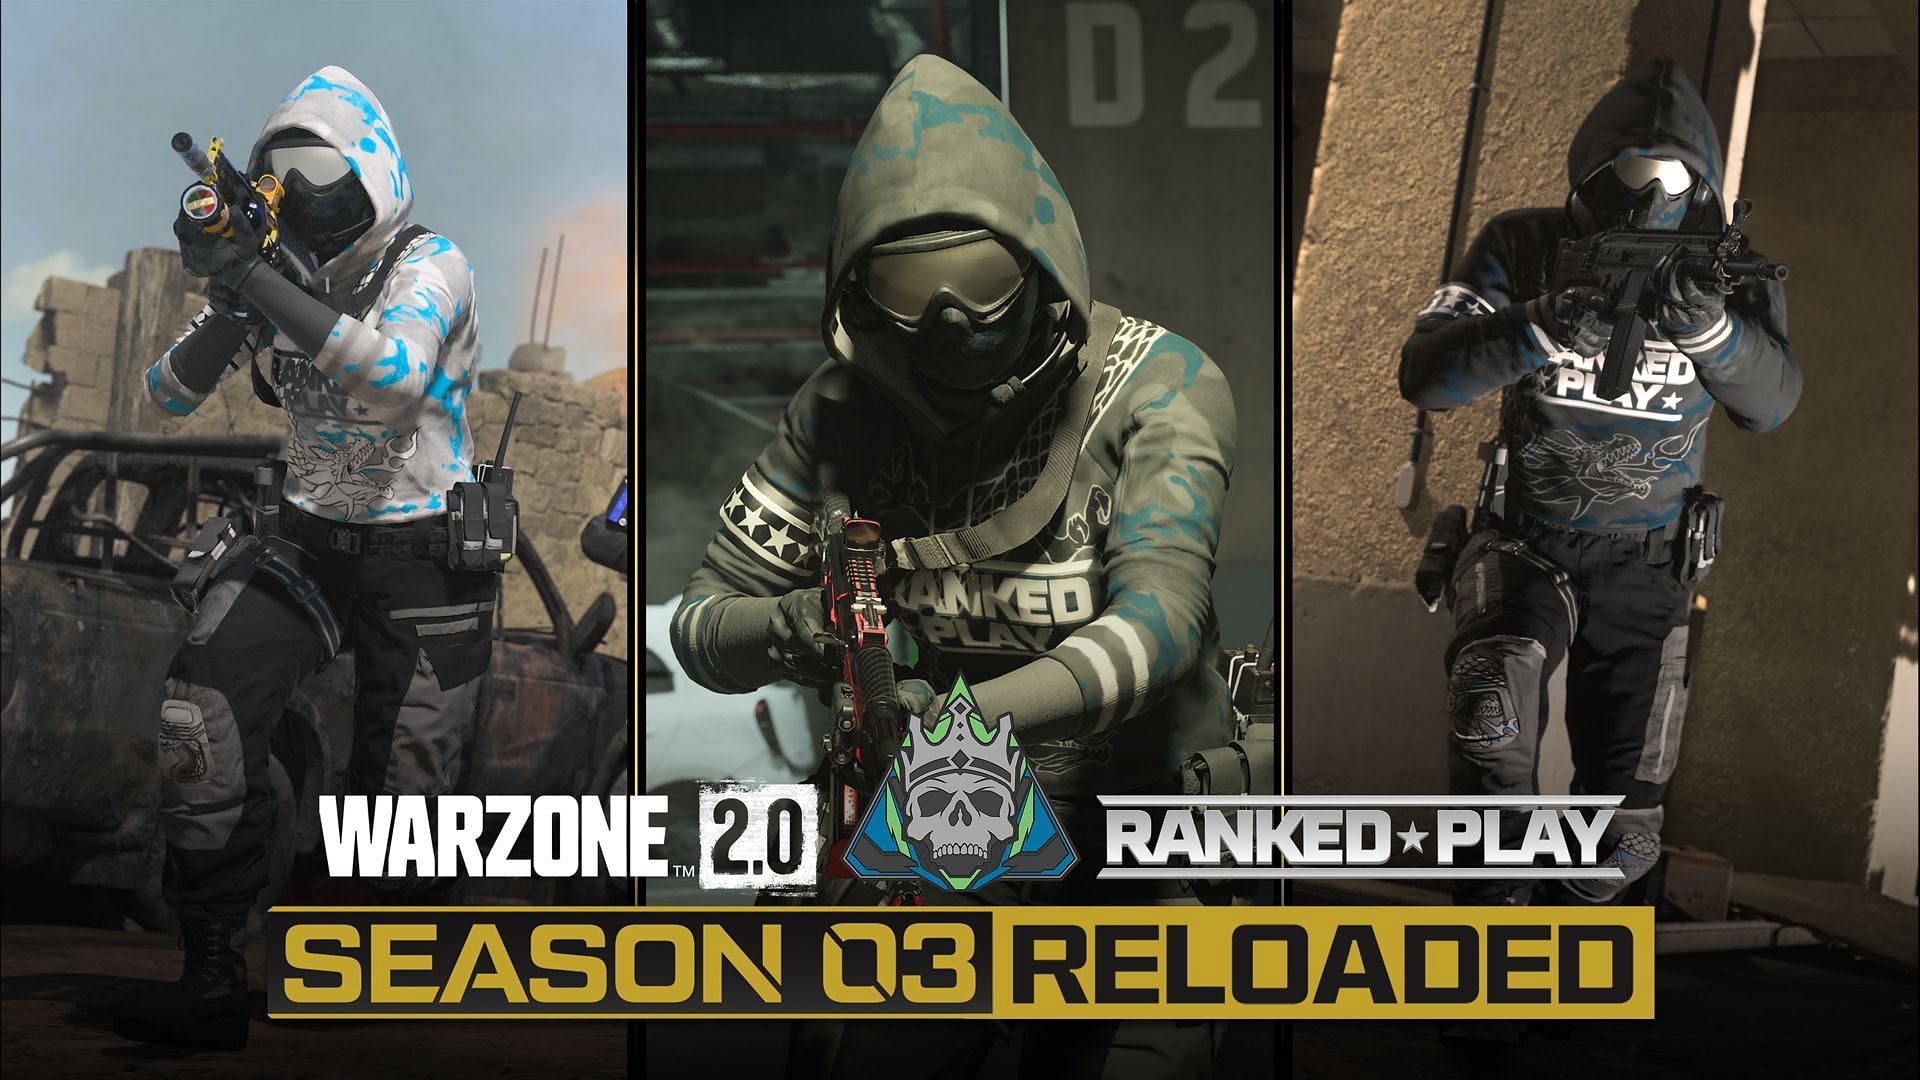 Warzone 2 Ranked Play is coming with Season 3 Reloaded (Image via Activision)